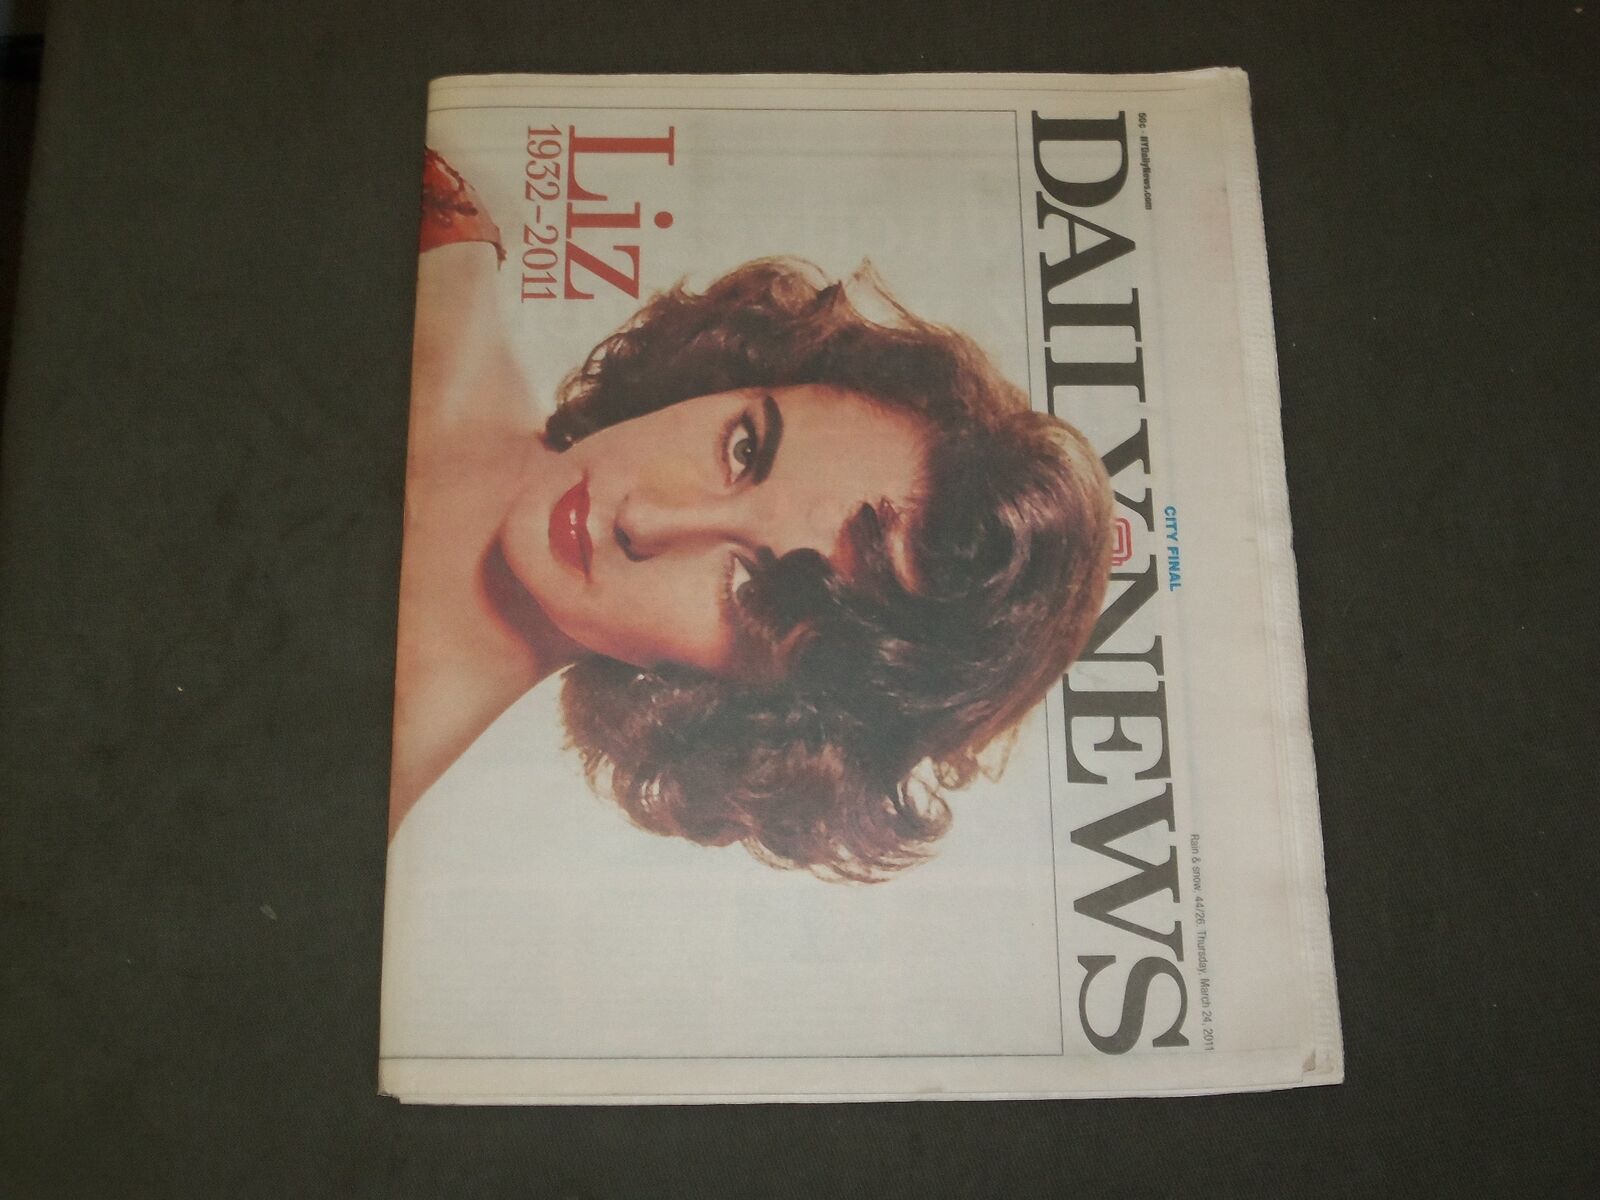 2011 MARCH 24 NY DAILY NEWS NEWSPAPER - ELIZABETH TAYLOR DEAD- 1932-2011-NP 3264